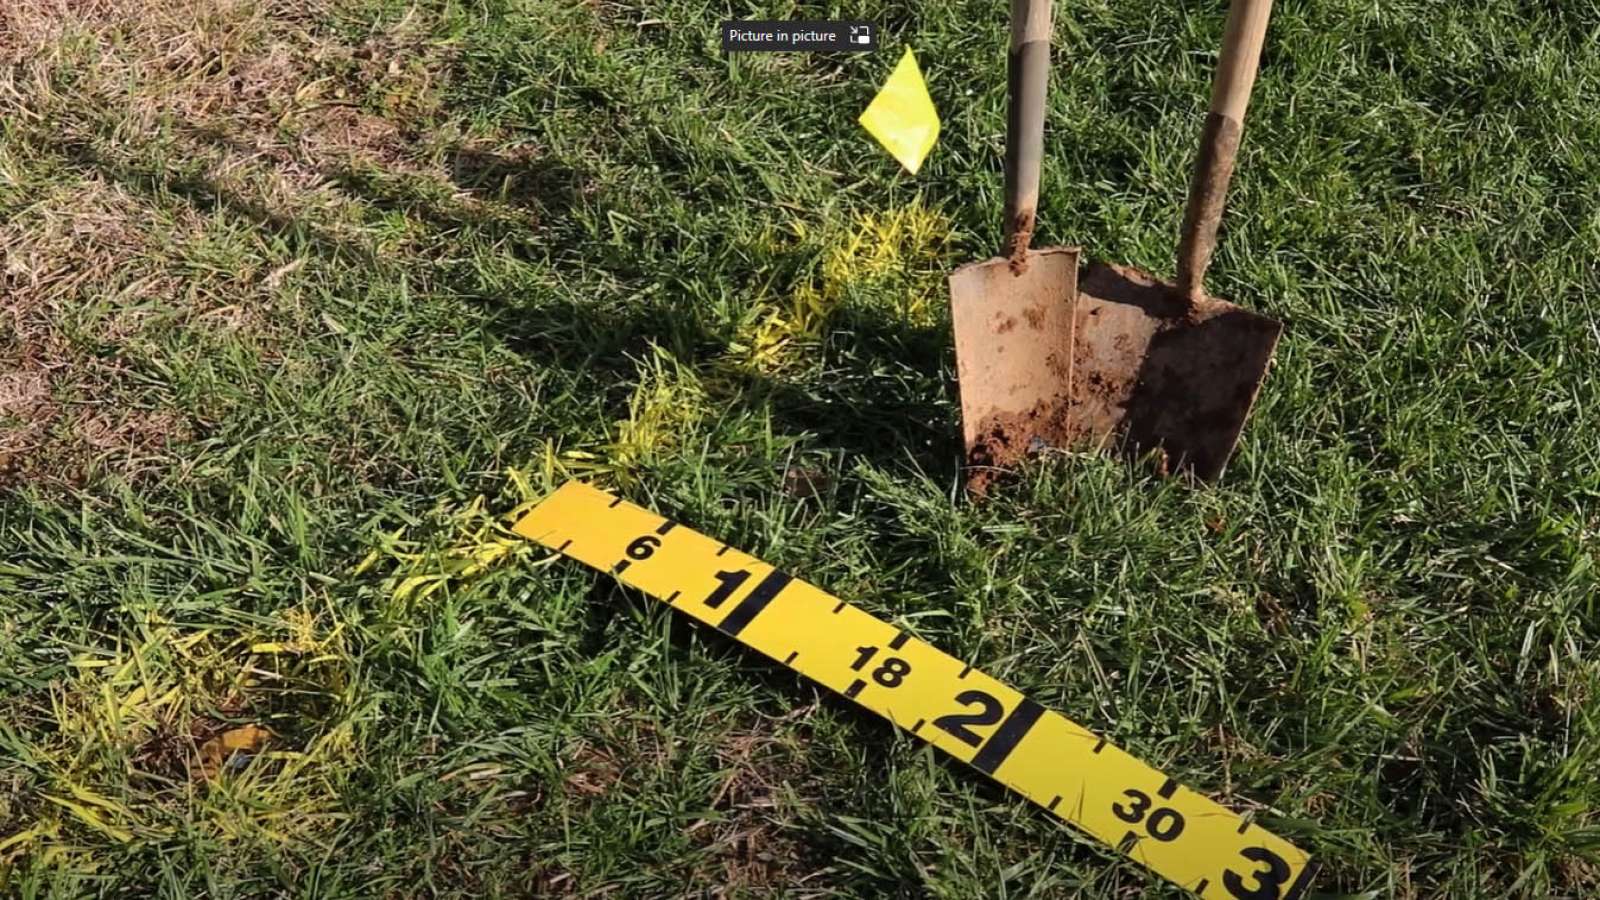 two shovels in grass yard with yellow flag and paint marker